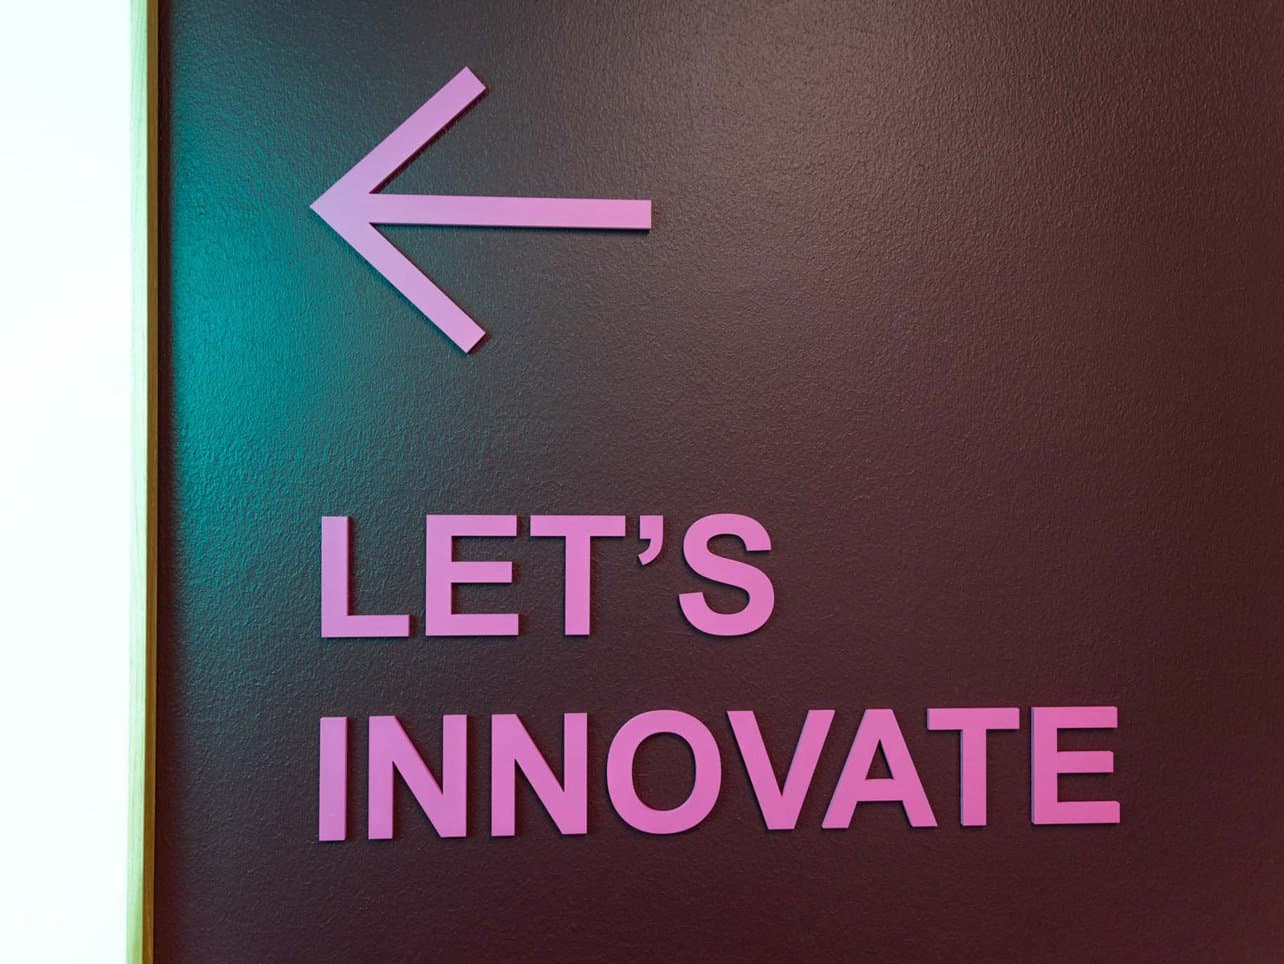 Let's innovate sign